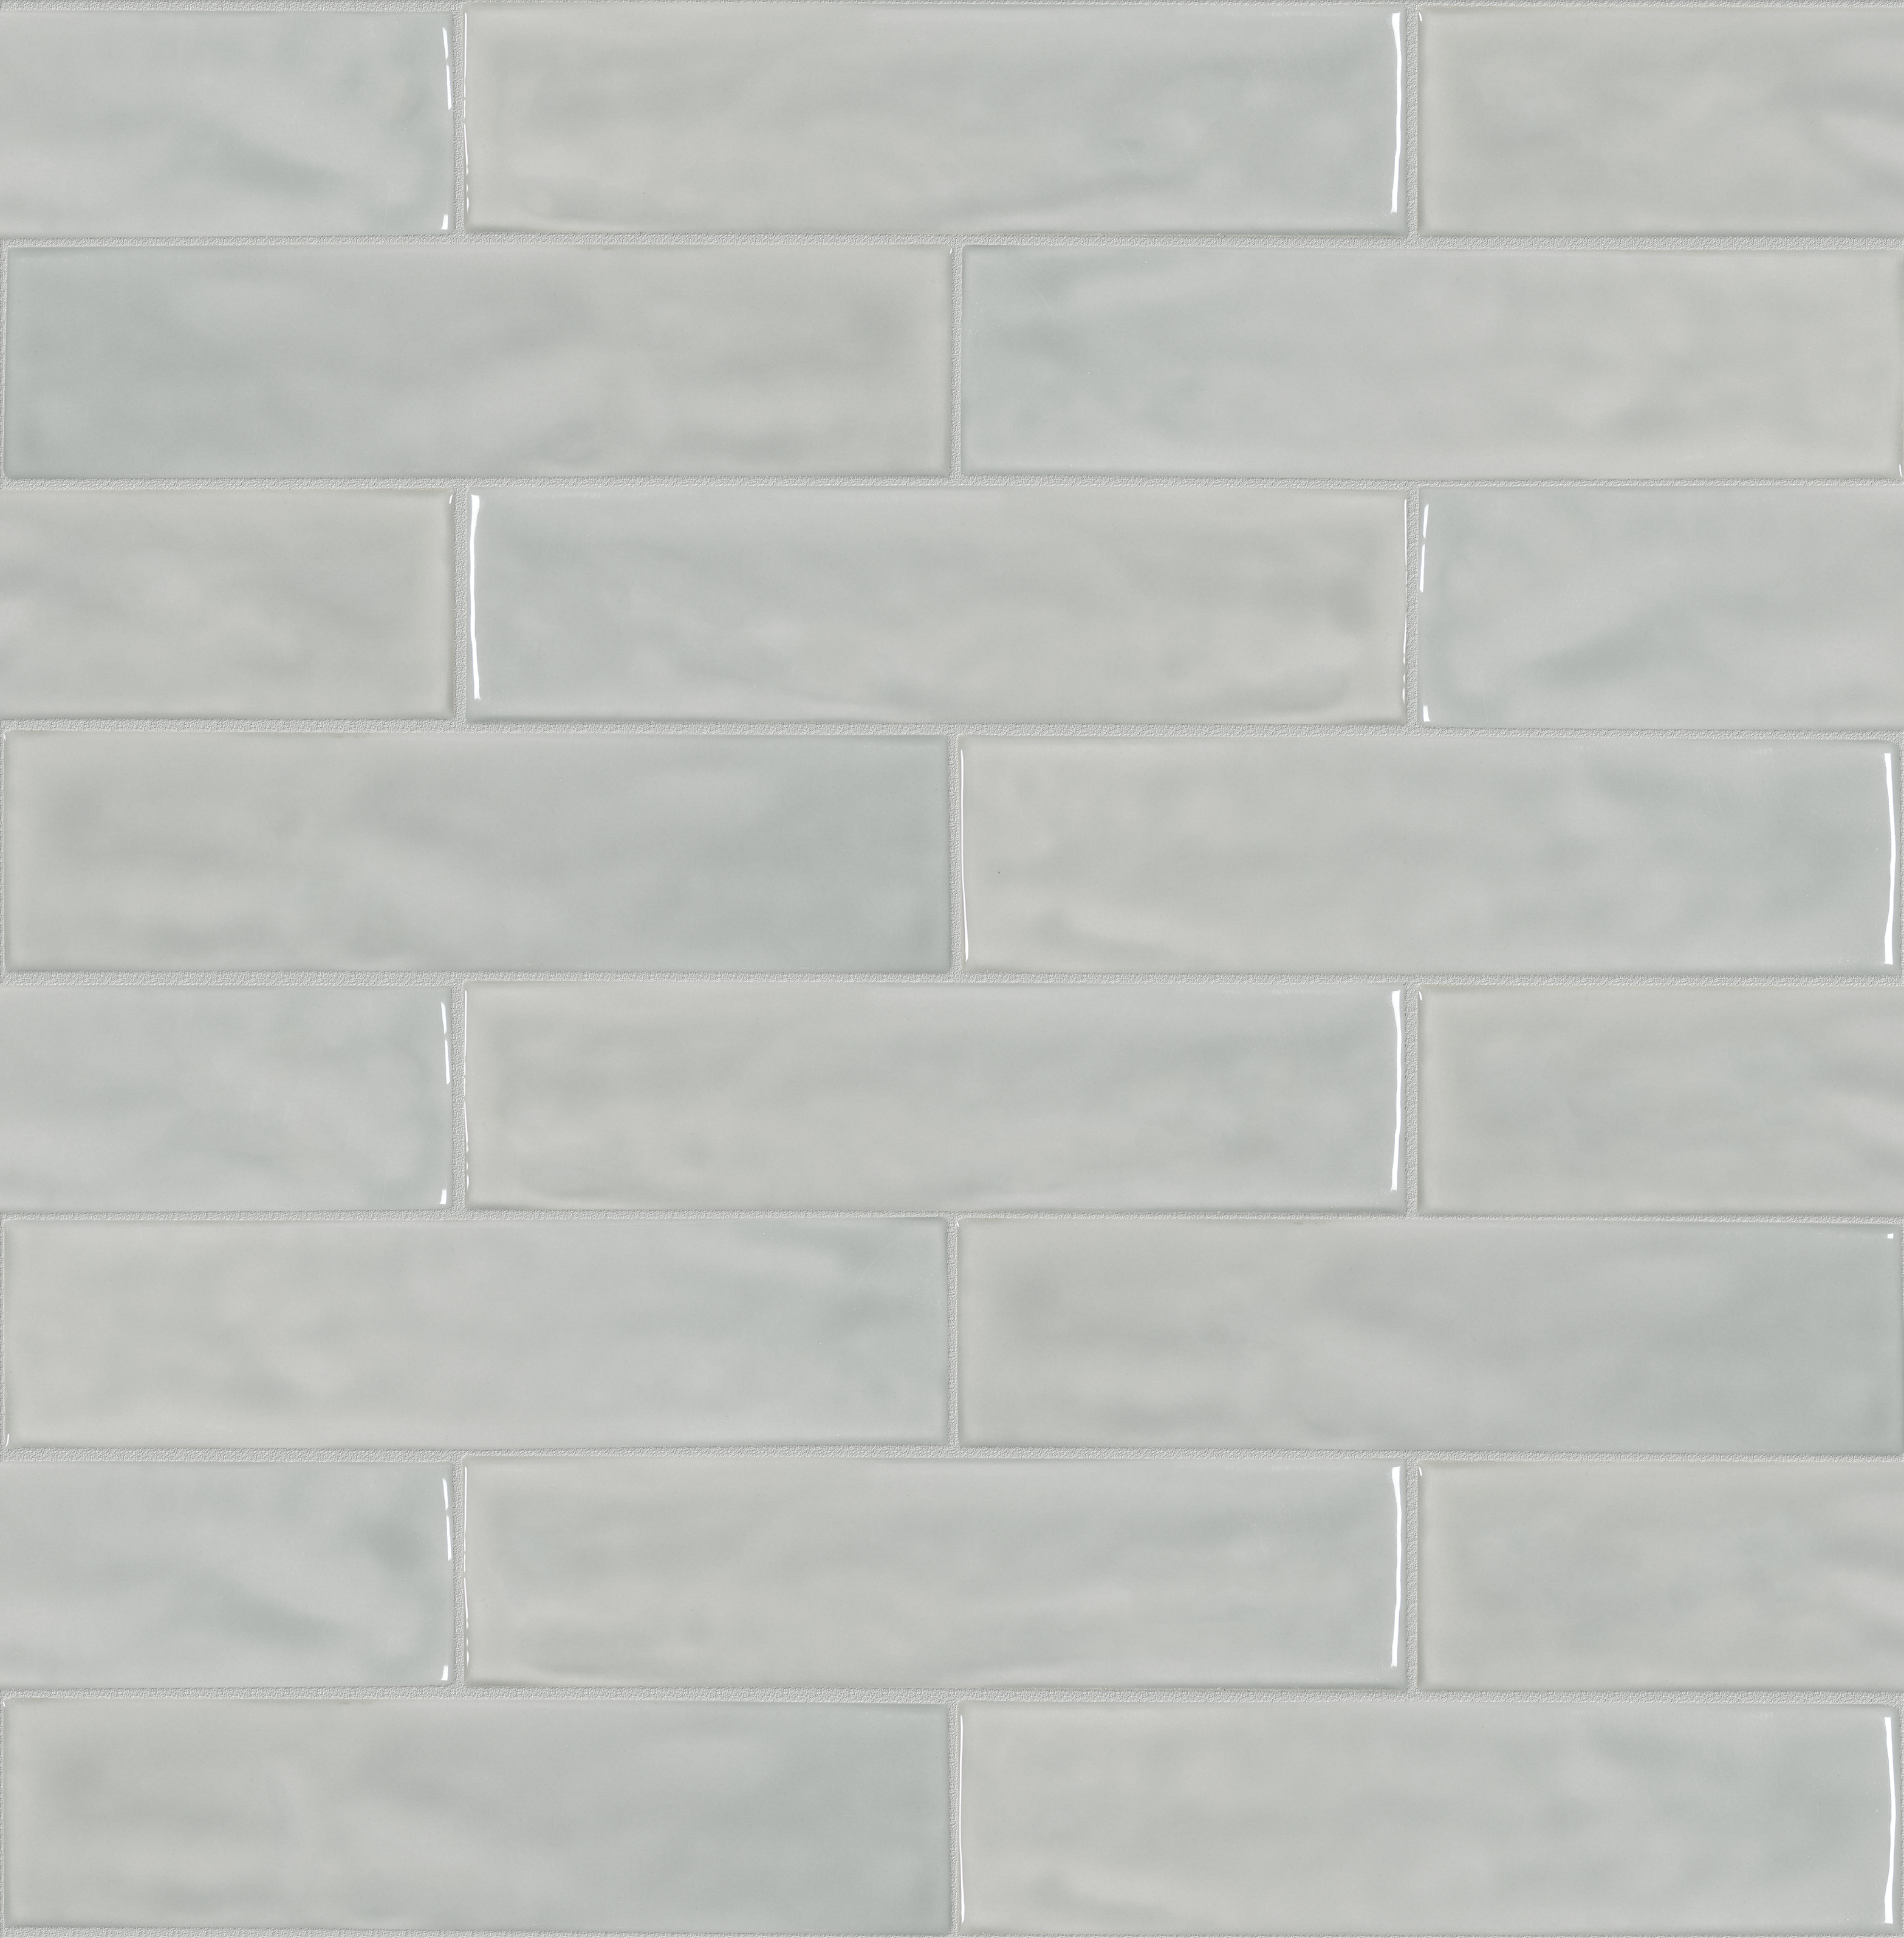 tide pattern glazed ceramic field tile from marlow anatolia collection distributed by surface group international glossy finish pressed edge 3x12 rectangle shape